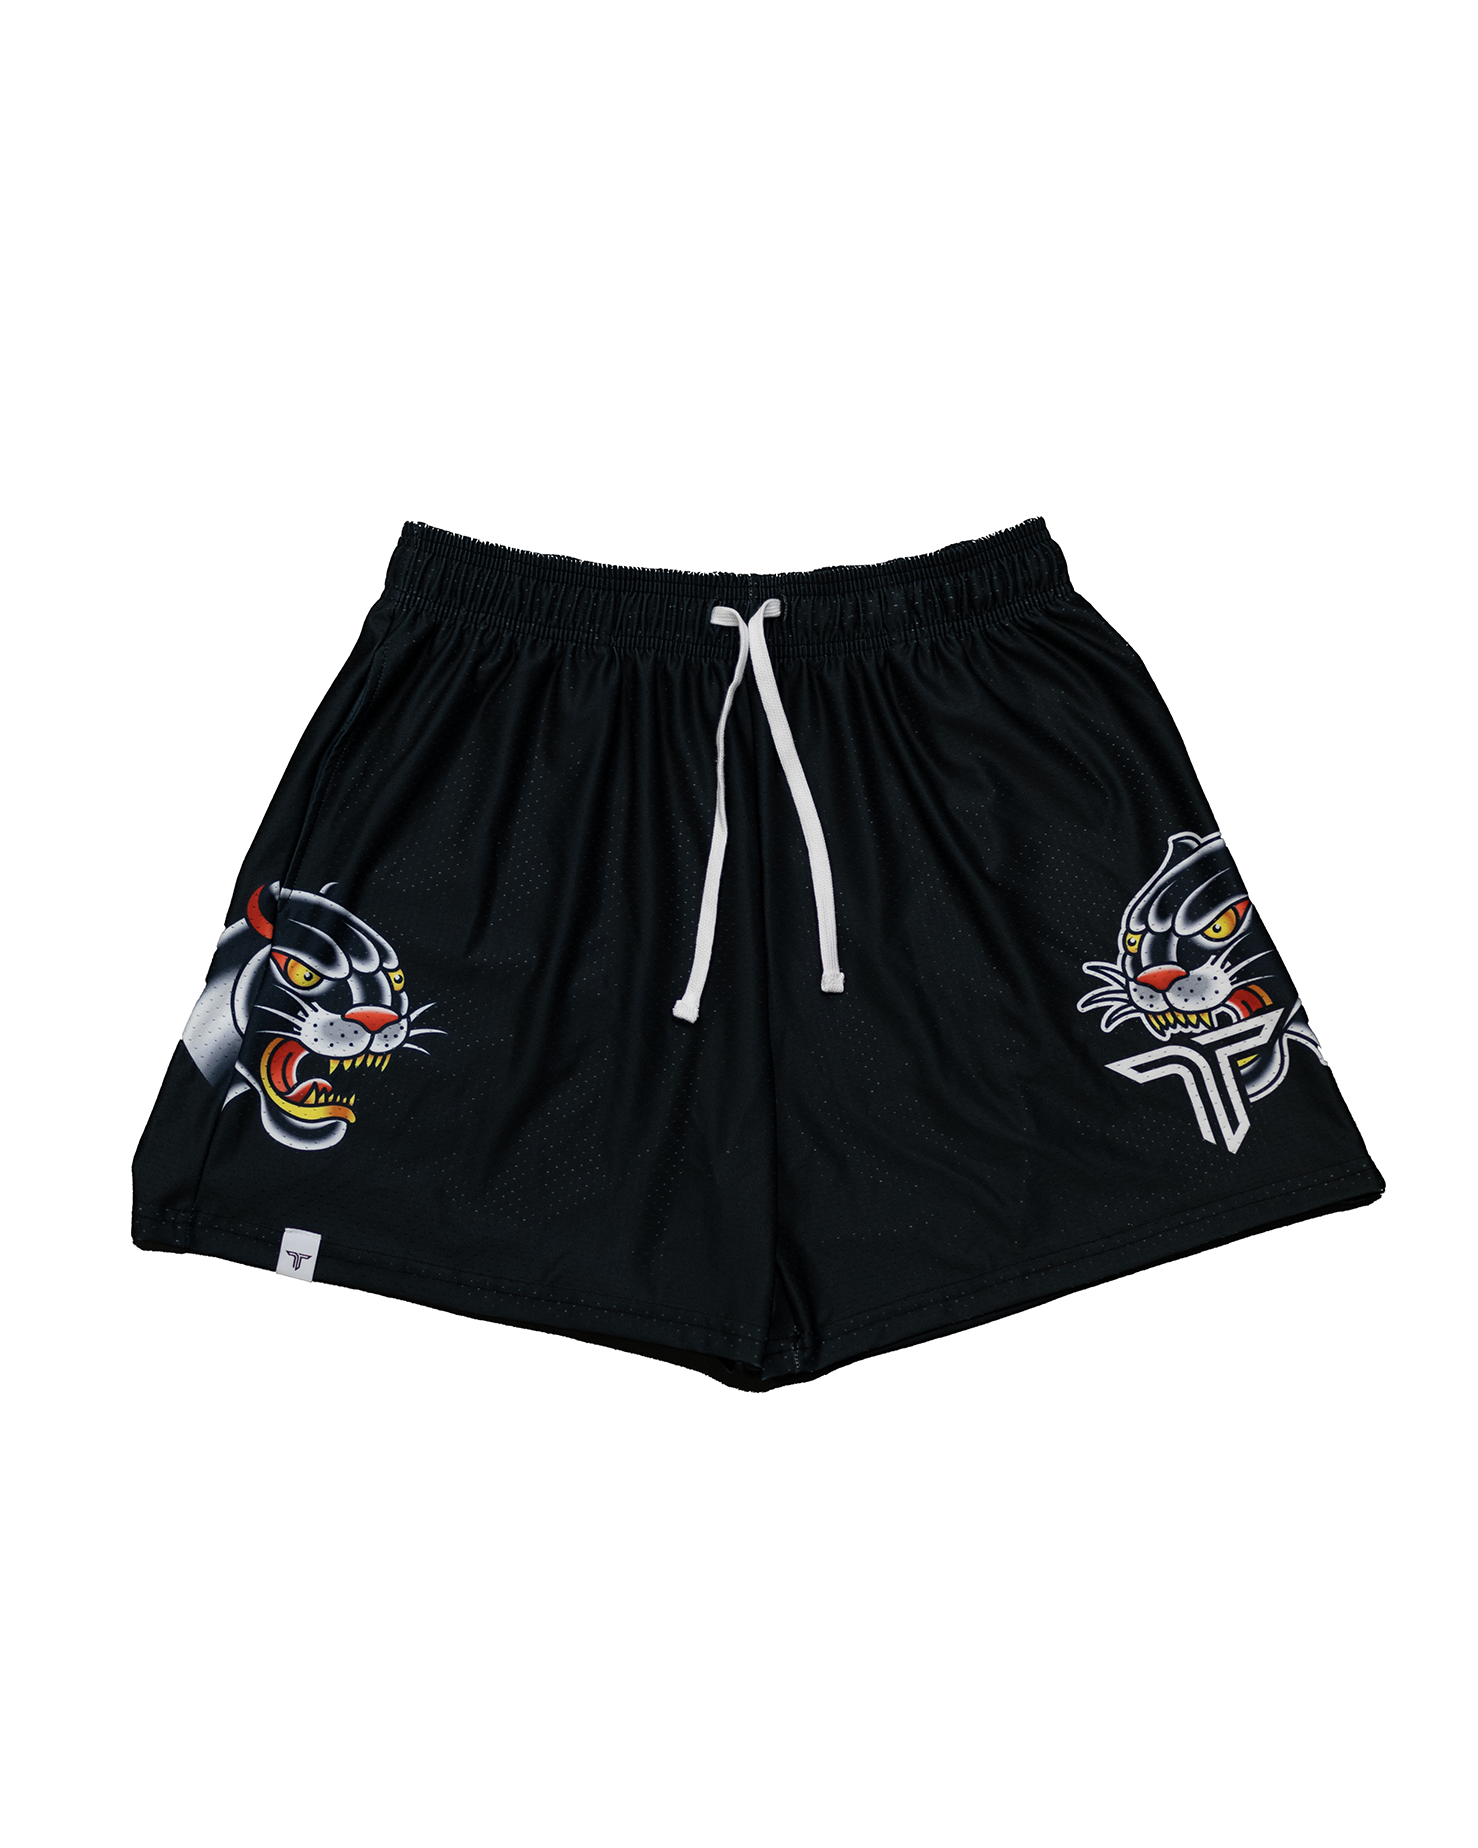 Chicago Bulls Black Strips Shorts basketball collection